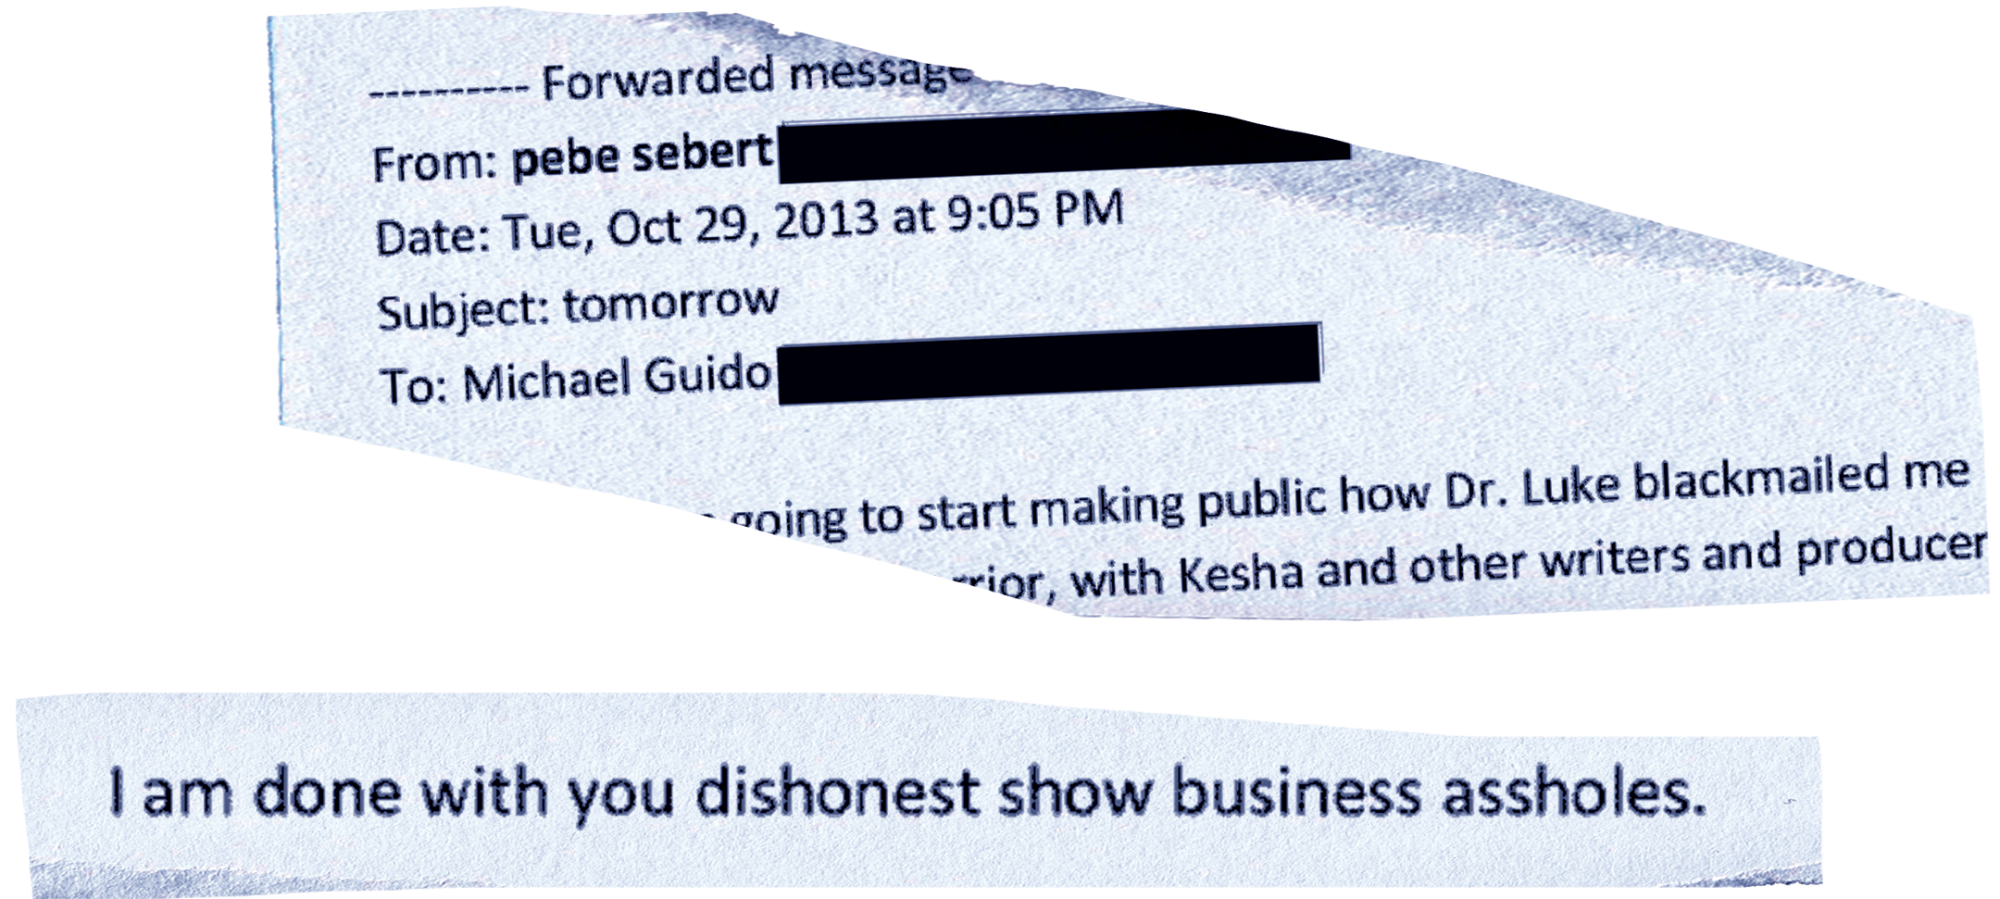 Email from 2013: “I am done with you dishonest show business assholes."